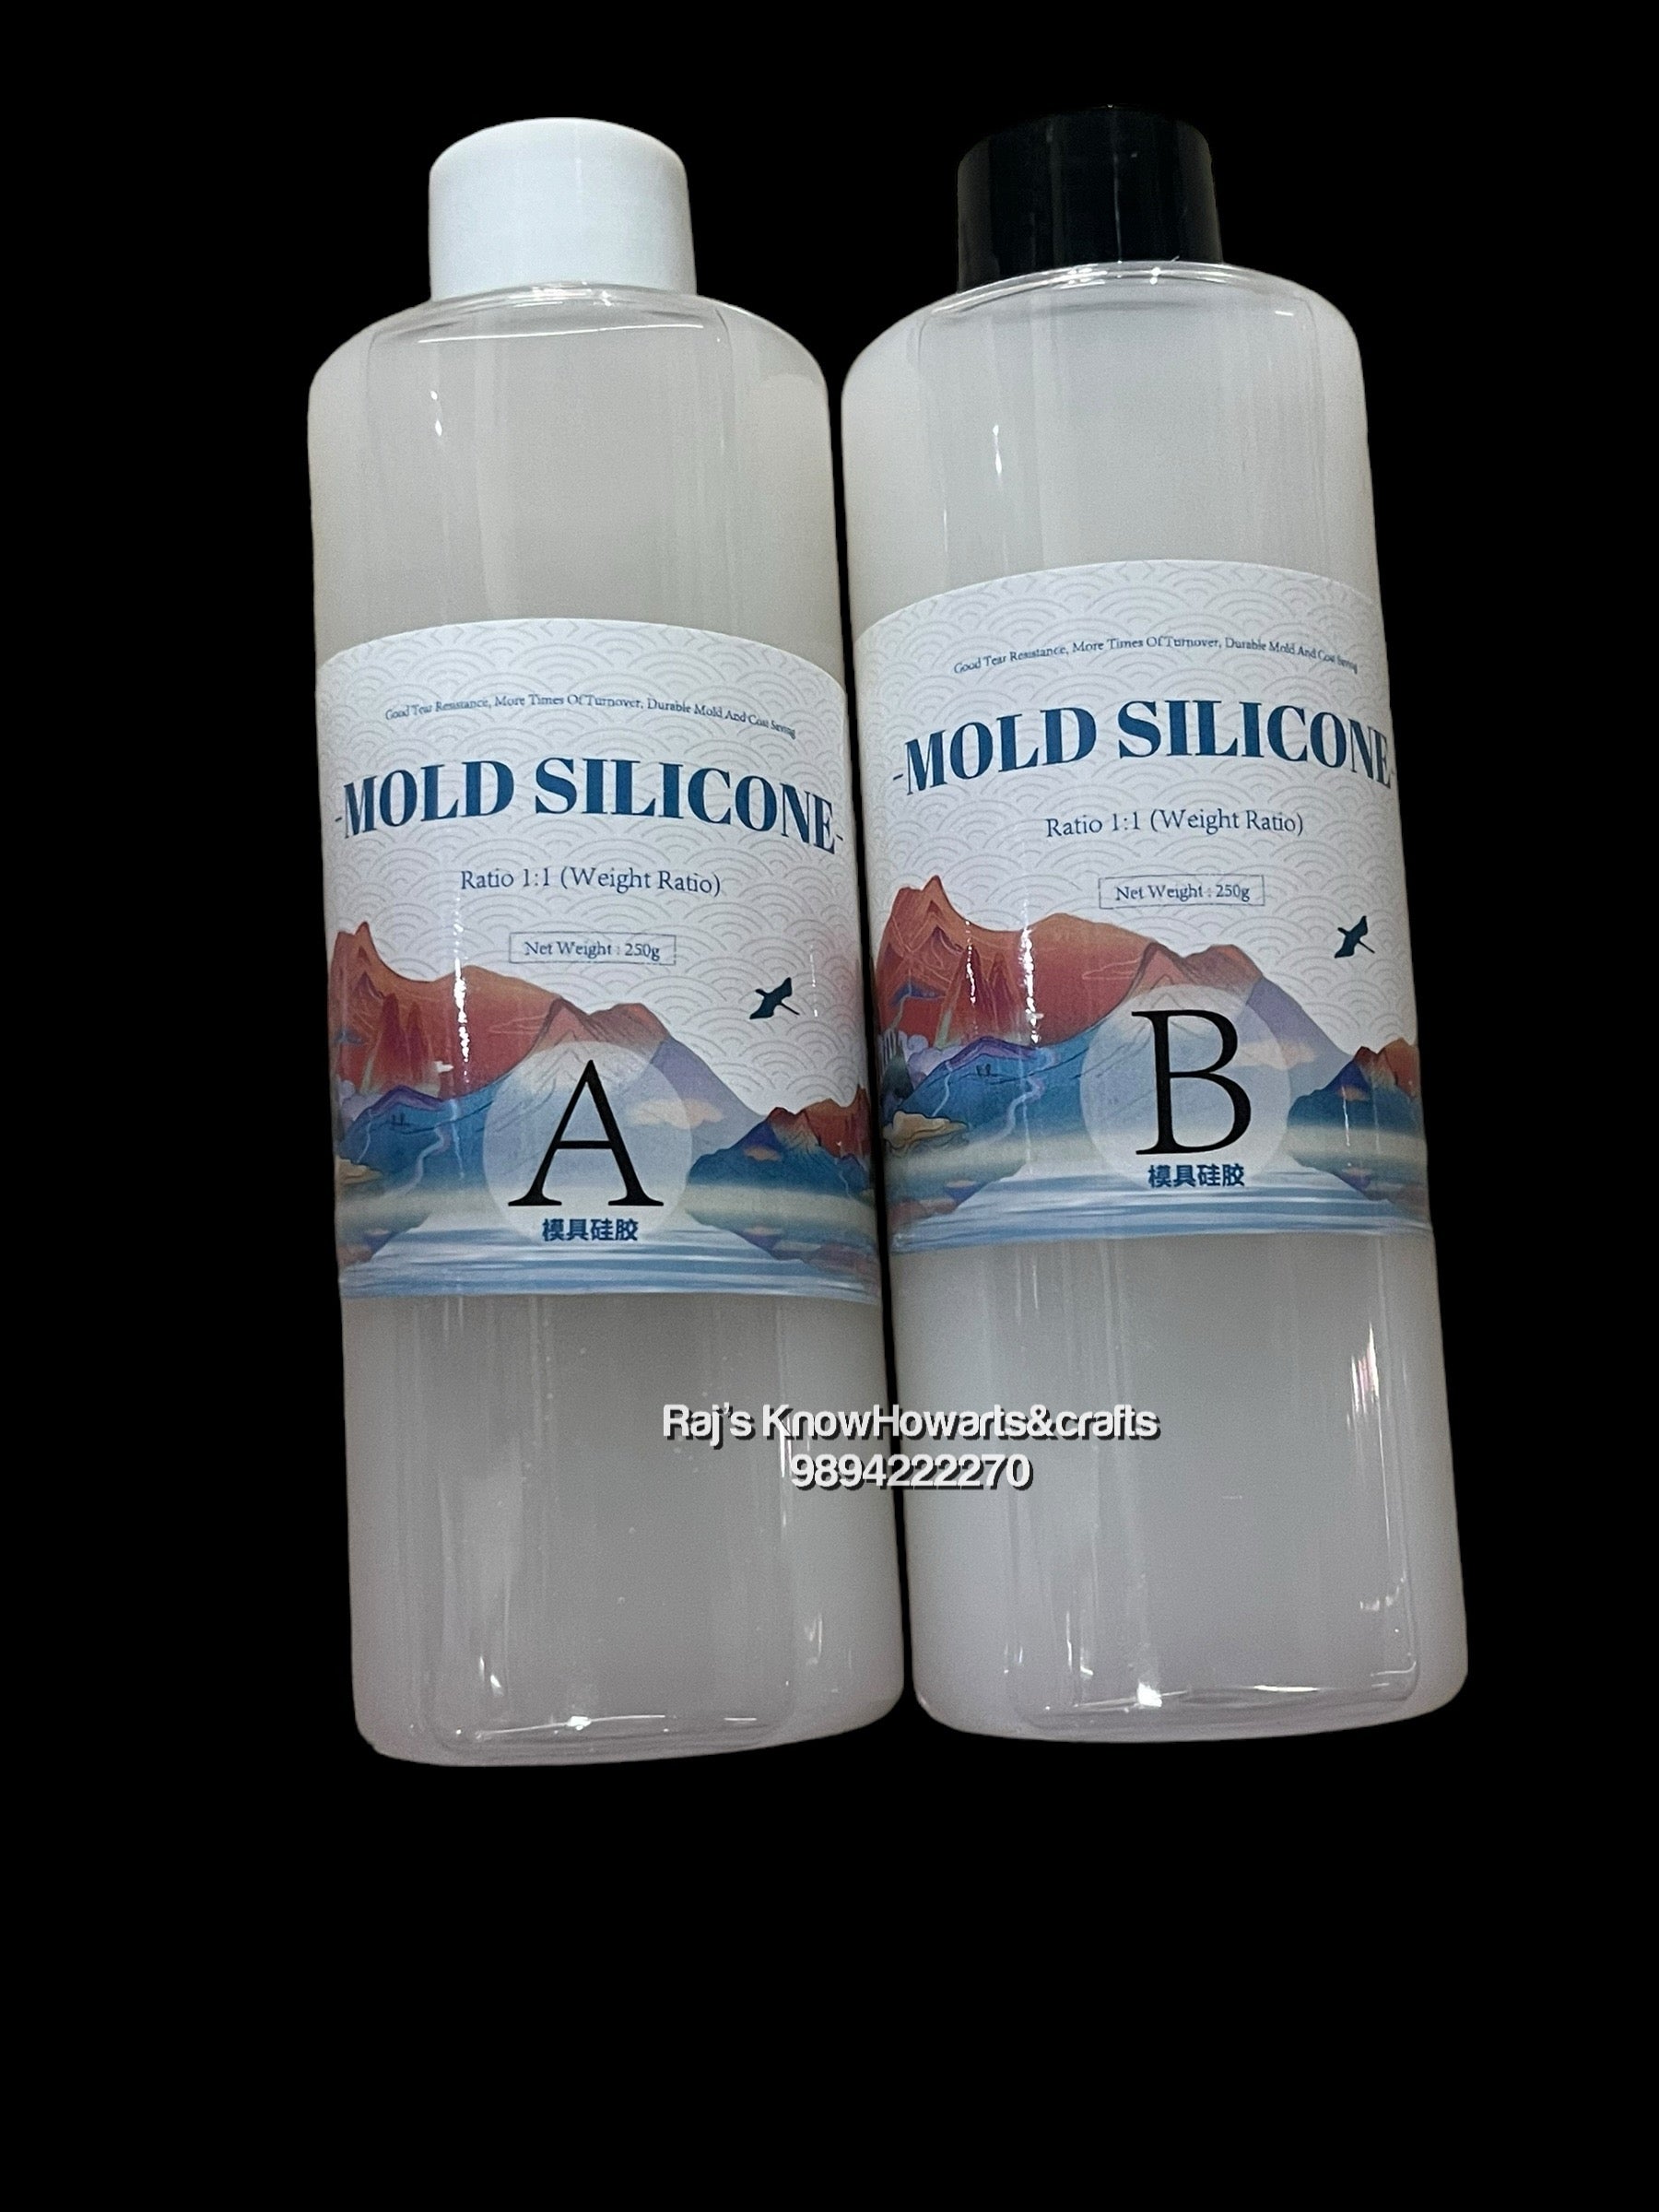 Mold silicone A and B